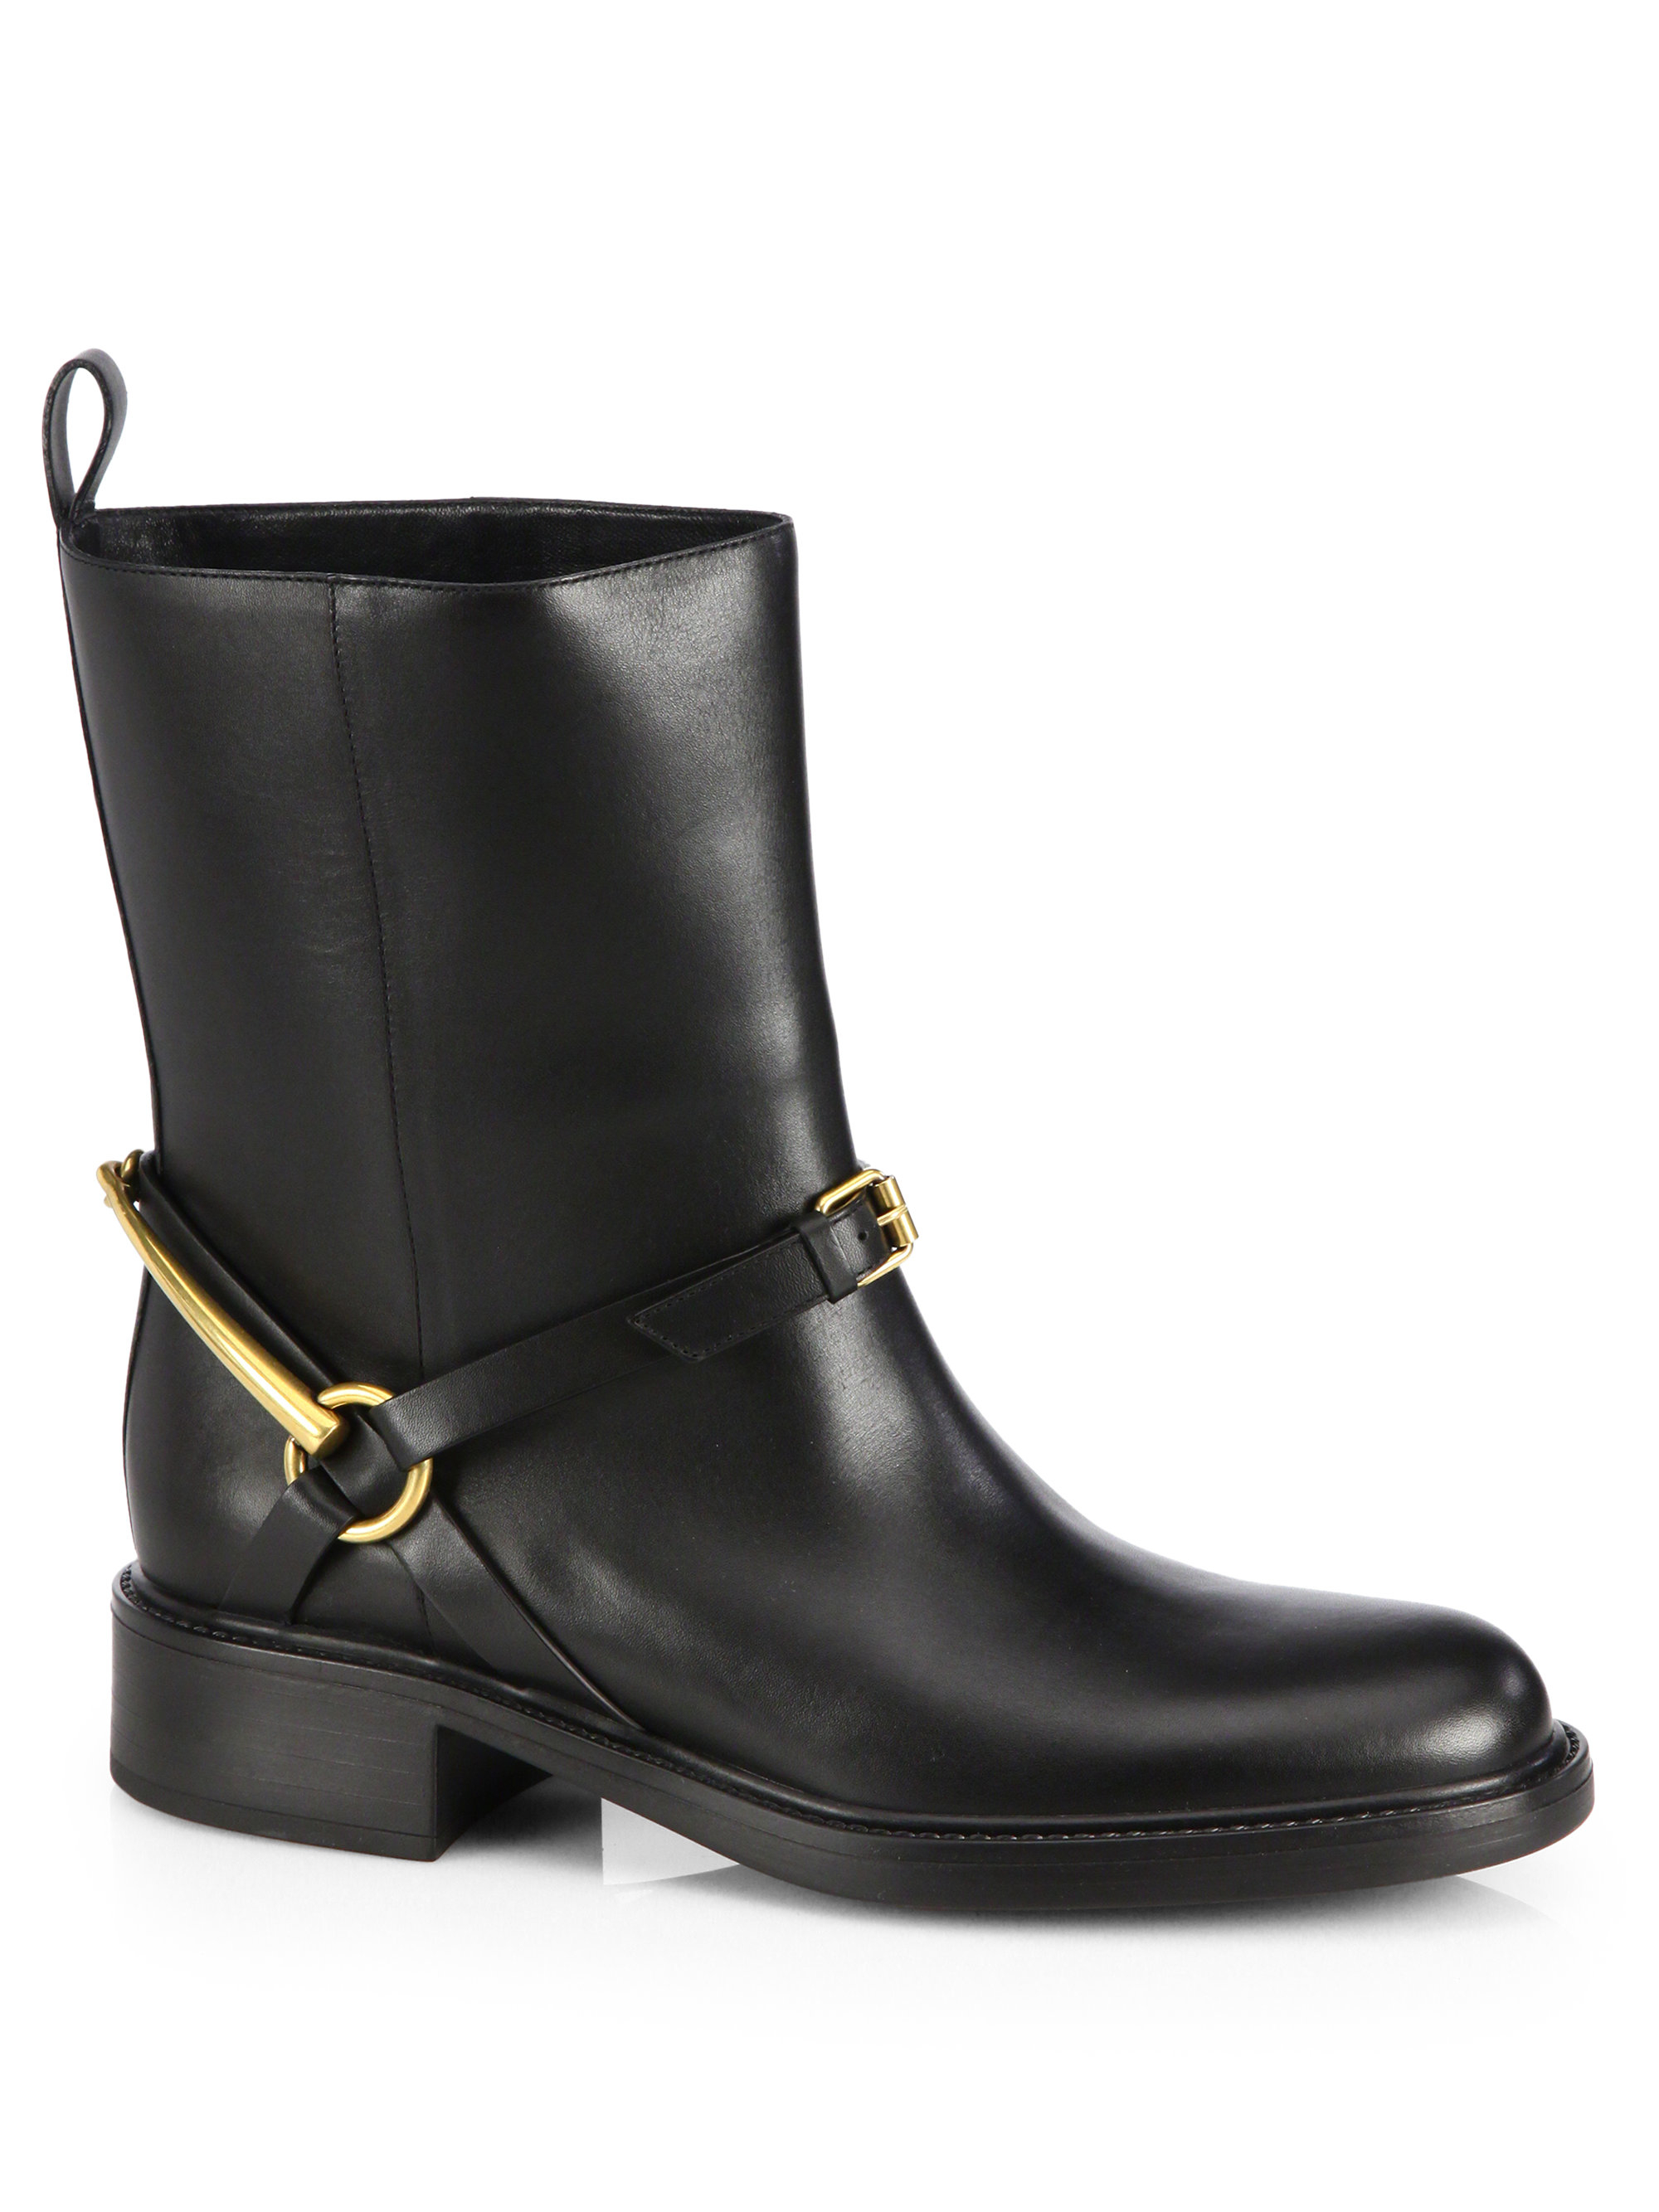 Gucci Tess Leather Horsebit Ankle Boots in Black | Lyst